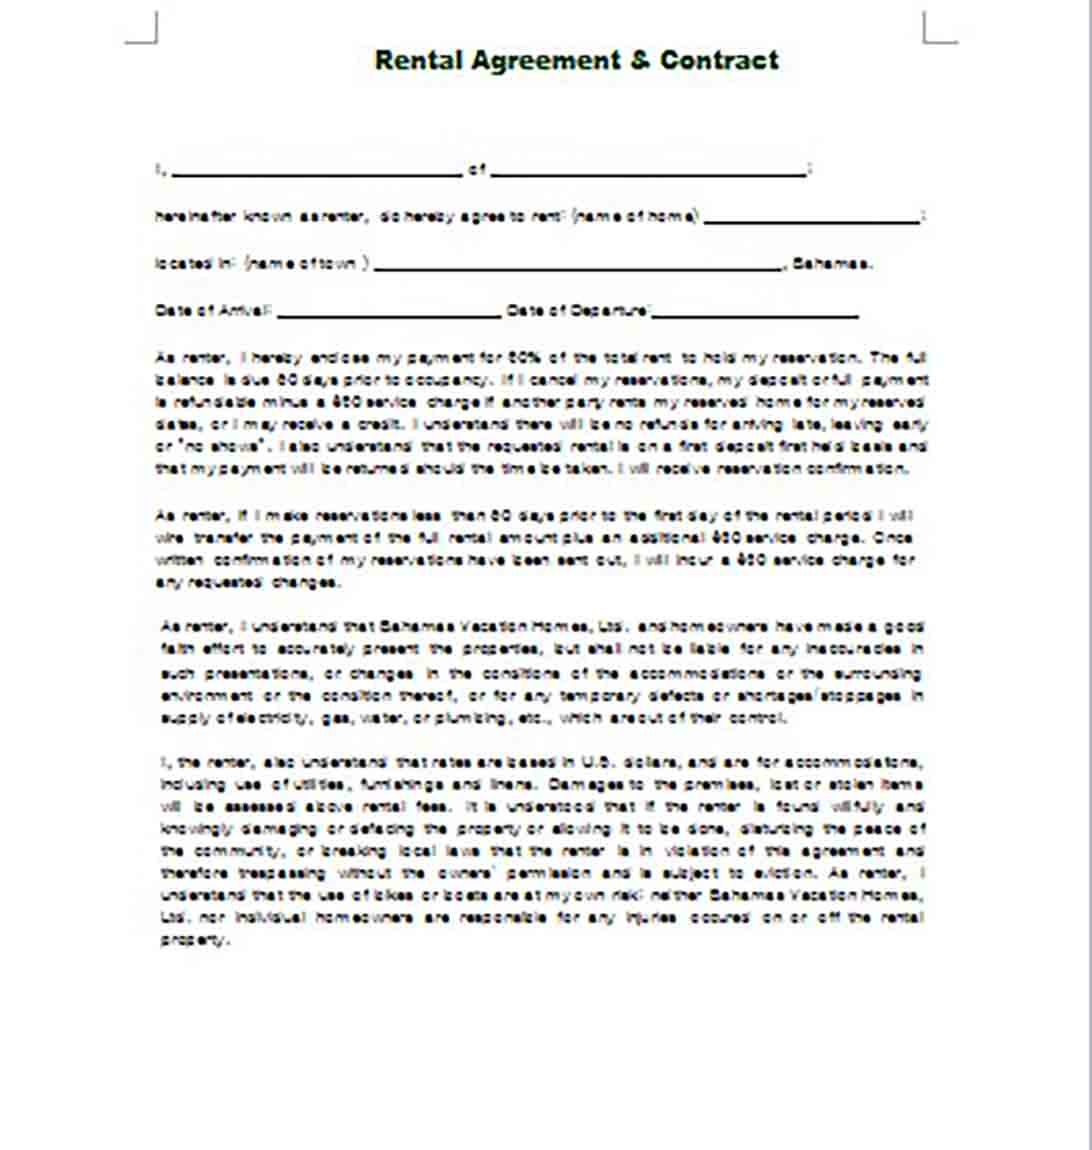 Rental Agreement Contract